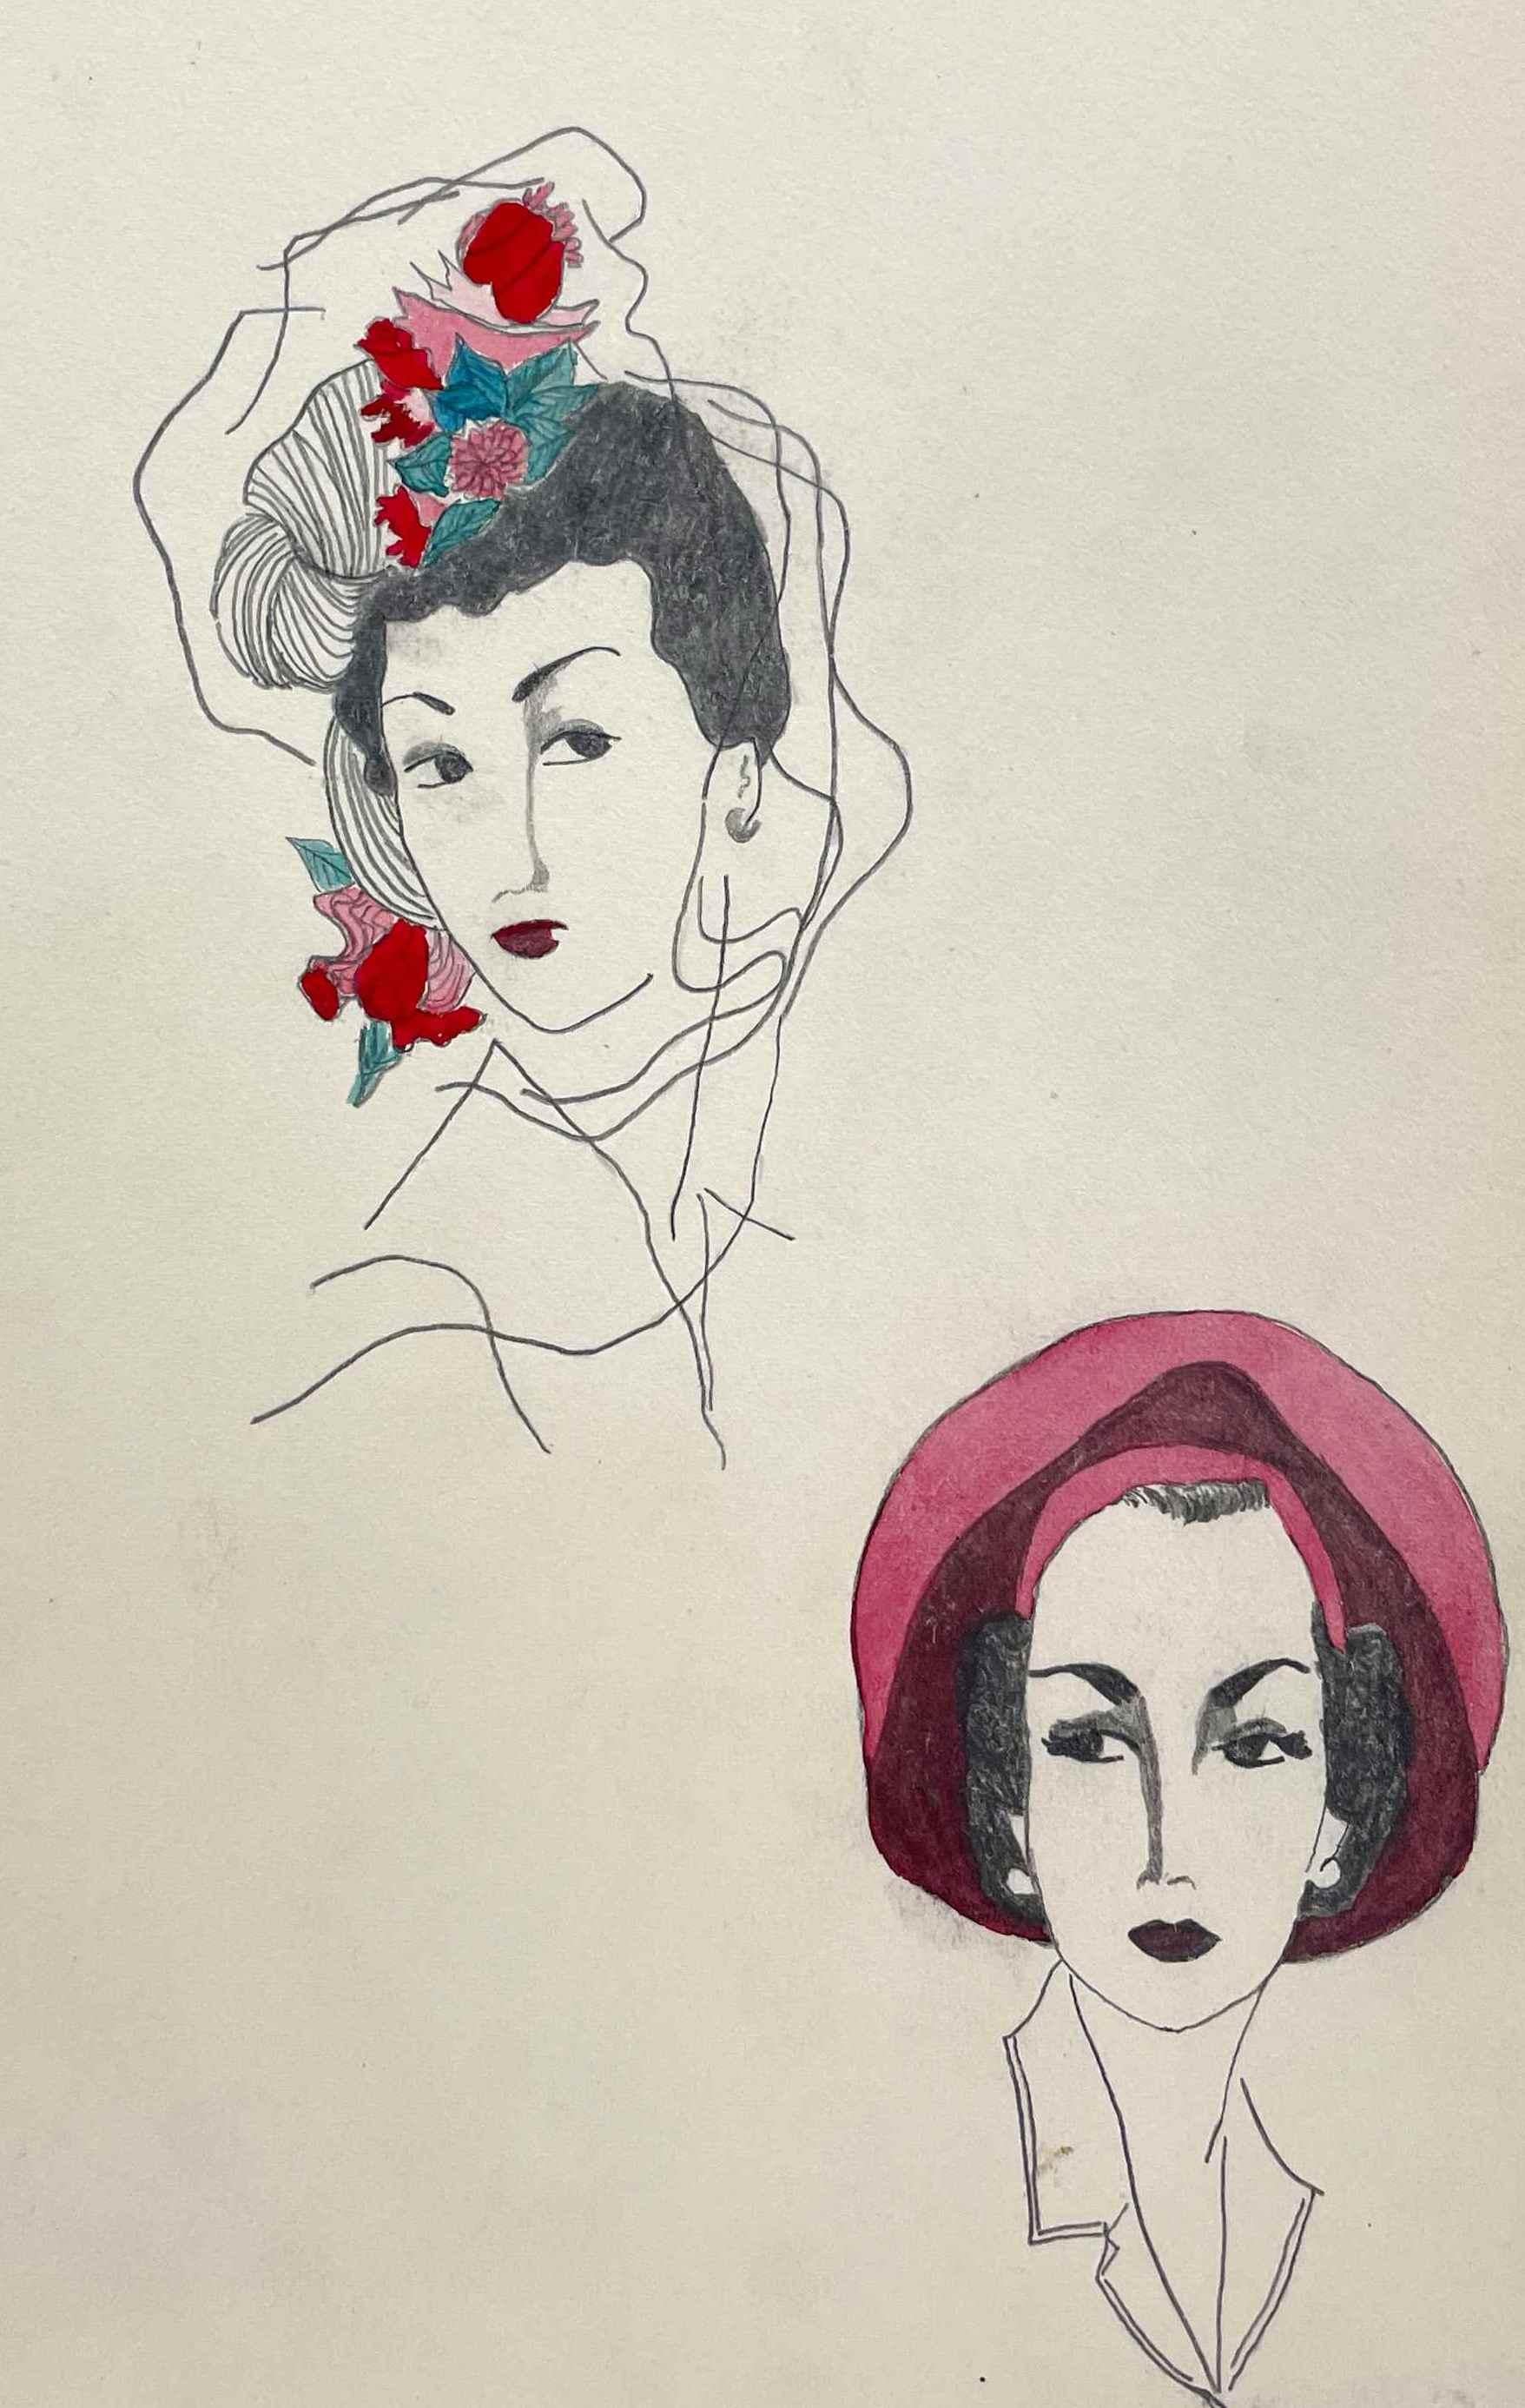 An early 1940s fashion study featuring women's hats in pink tobes.  Provenance: Cornelia Steckl-Jurin, Founder of the Fashion Department at the School of the Art Institute of Chicago. Archivally matted to 12